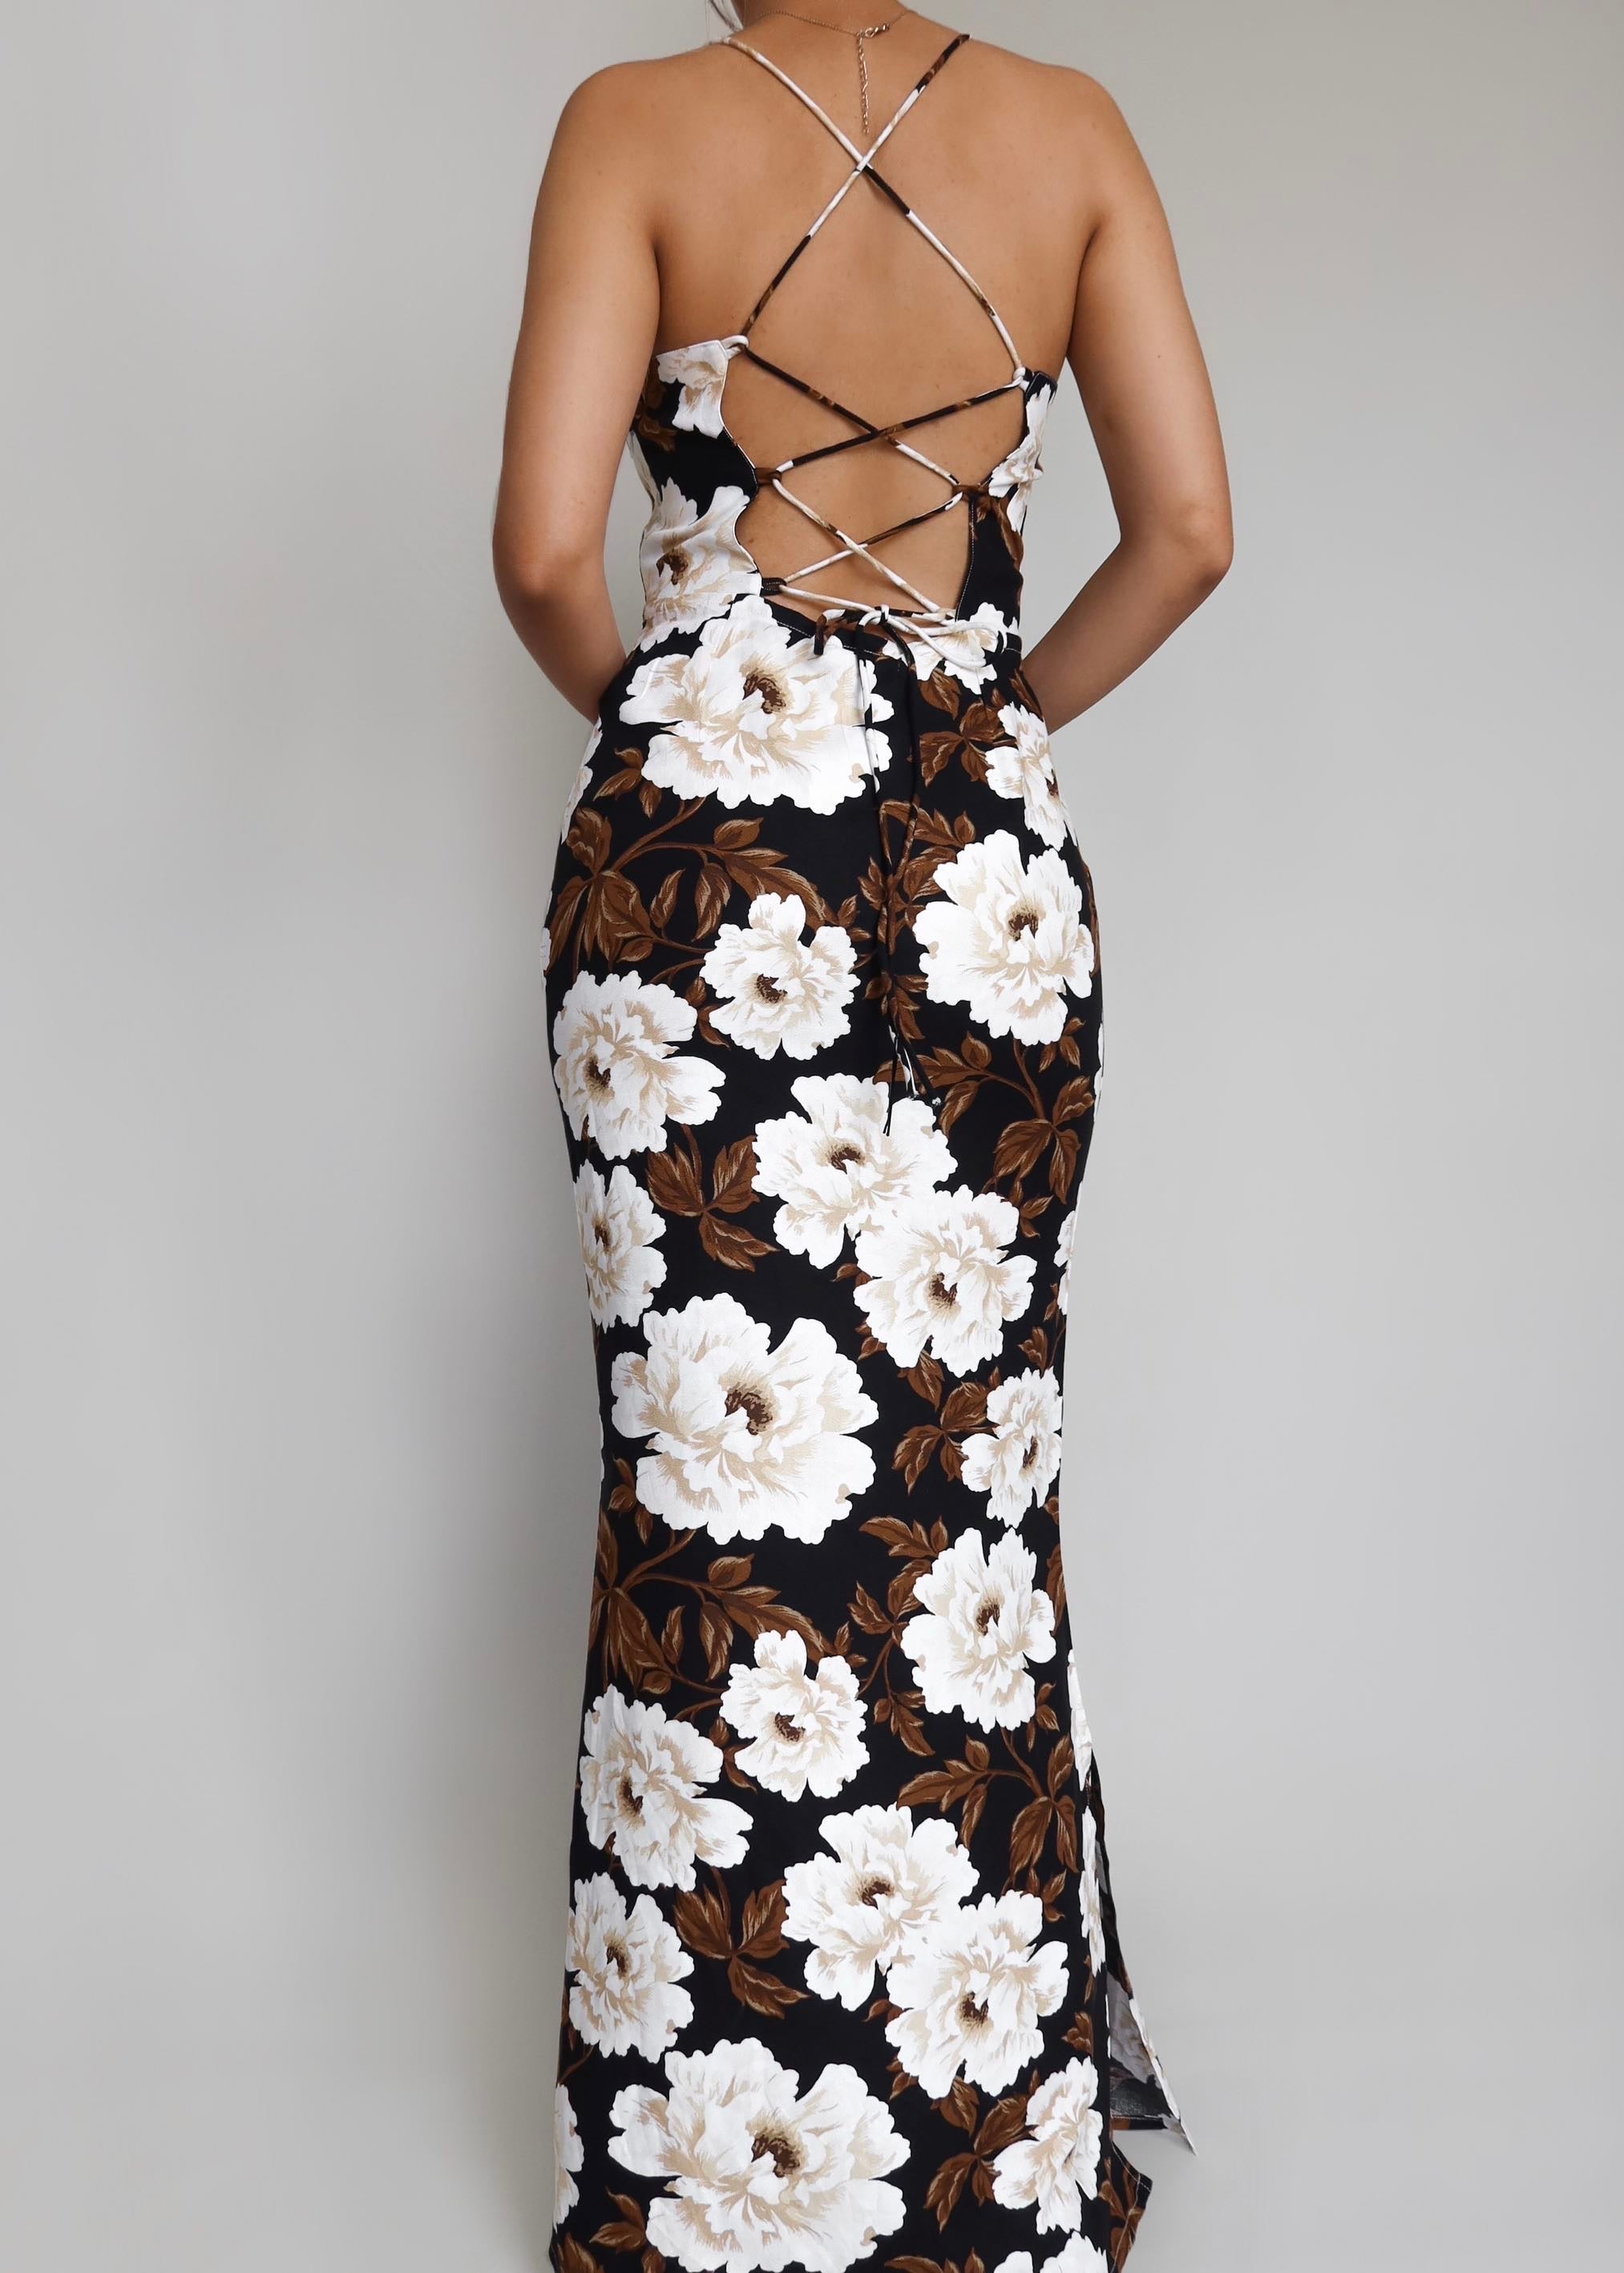 Buy BACKLESS PLUNGING BLACK KNOT MAXI DRESS for Women Online in India